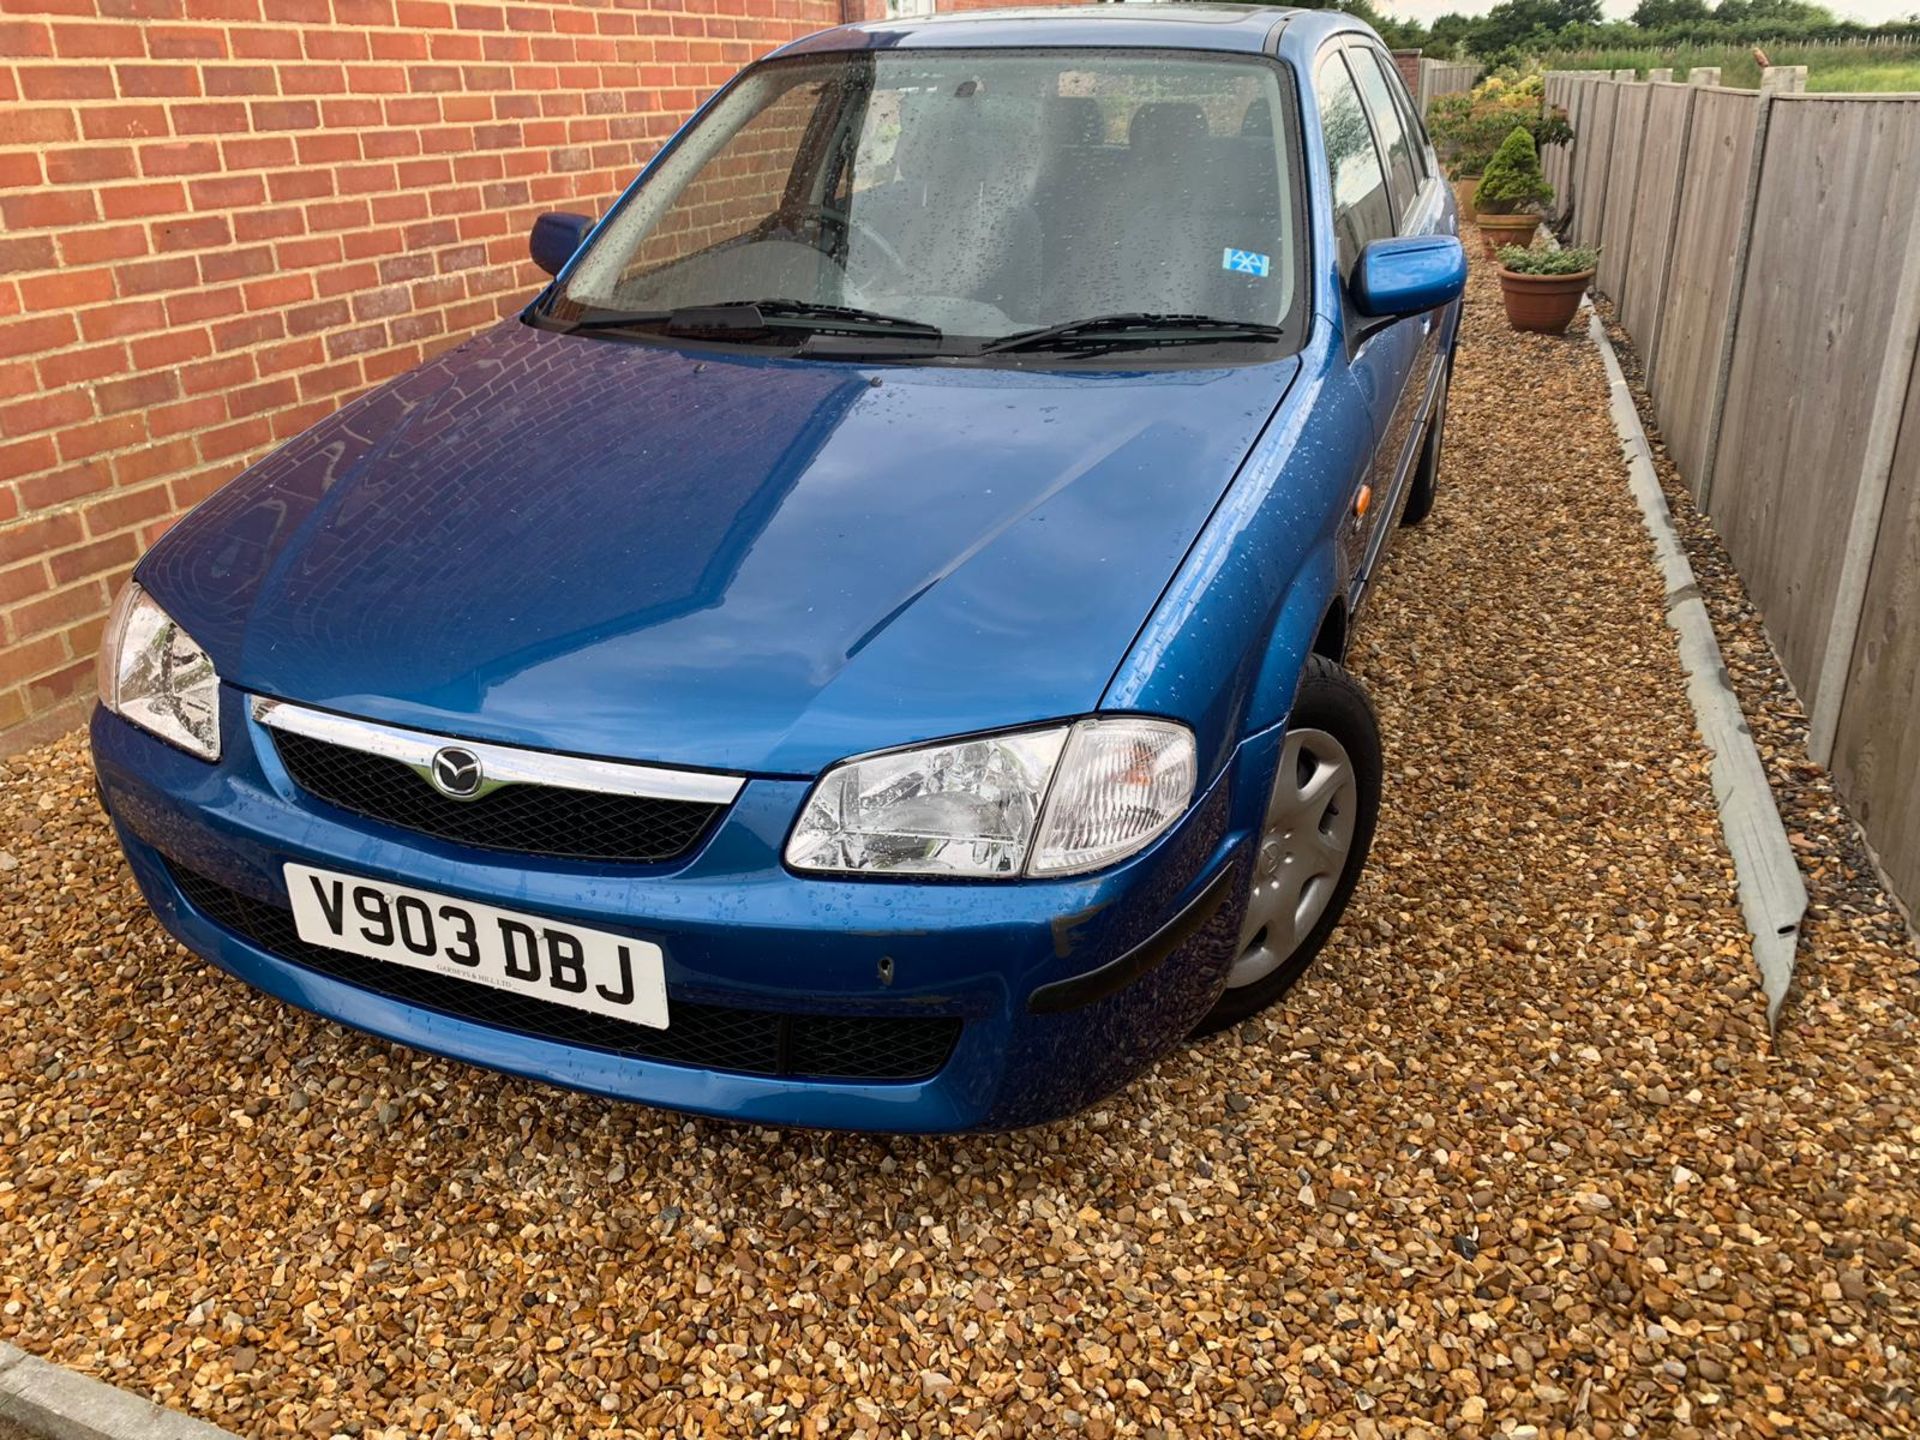 1999 MAZDA 323 GXI 1.5 PETROL 90 HP HATCHBACK, 1 OWNER FROM NEW, LAST SERVICE 38 MILES AGO *NO VAT* - Image 3 of 30